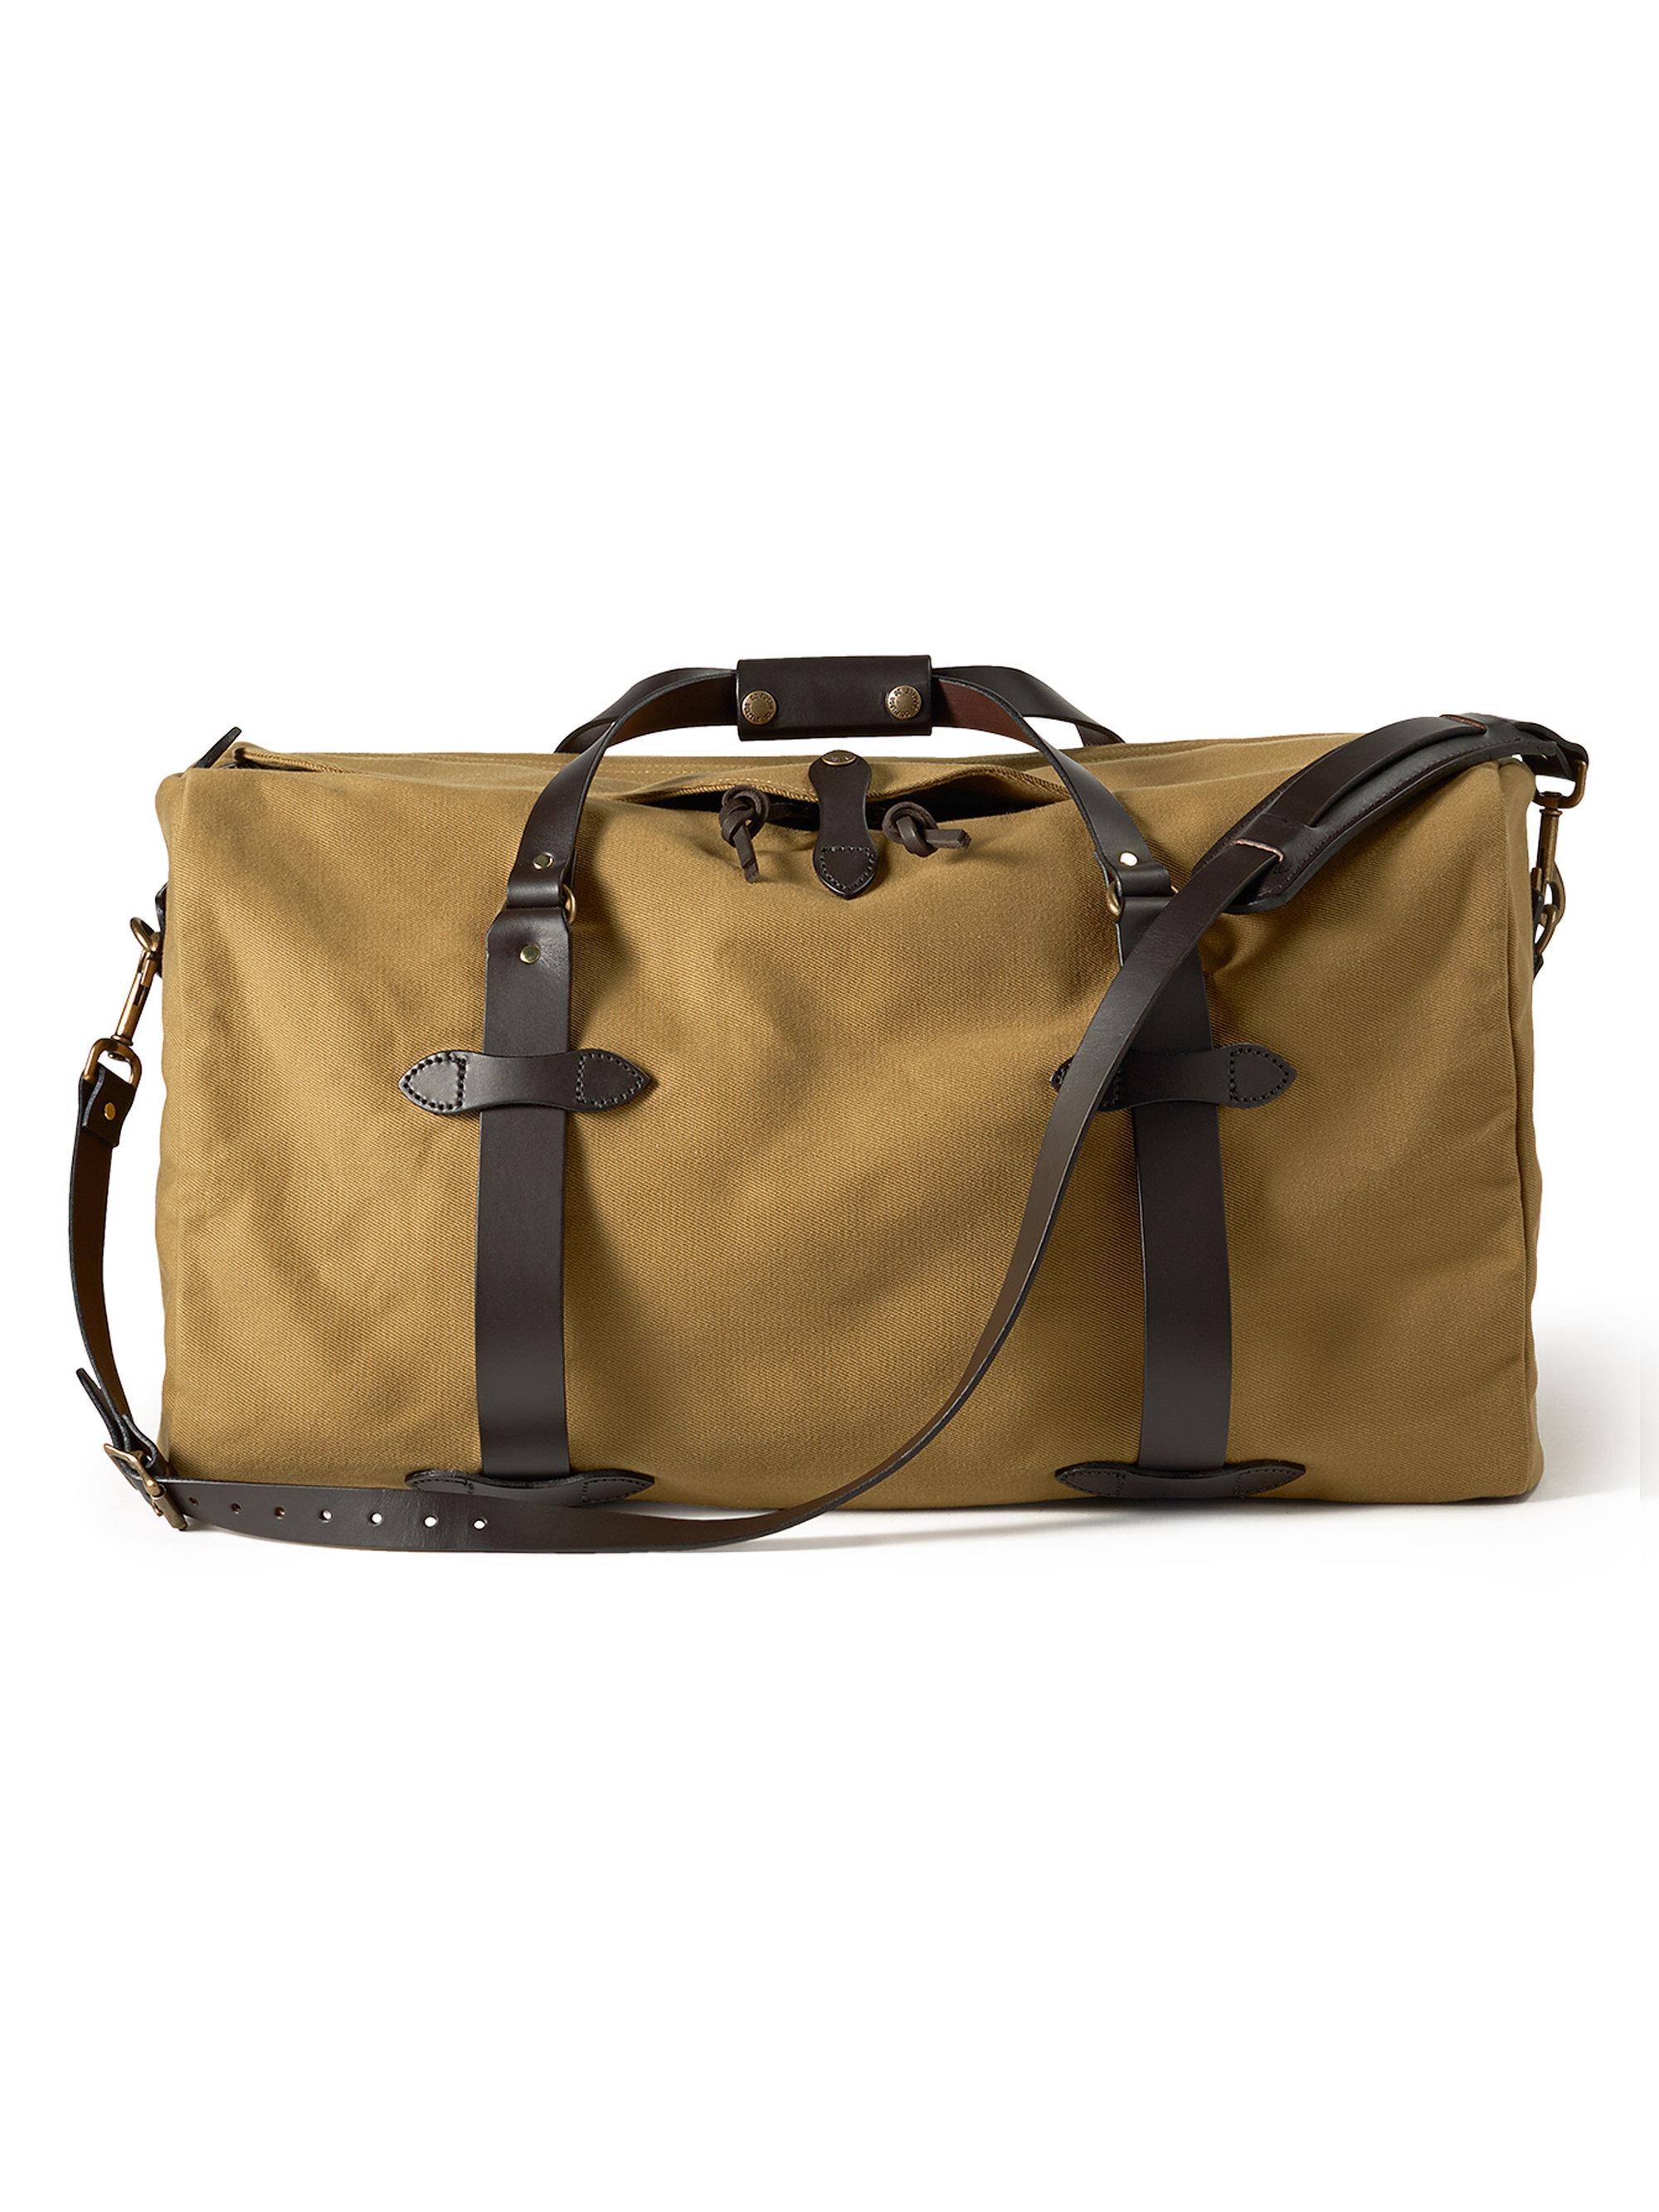 Filson Bridle Leather Duffel Bag in Tan (Natural) for Men - Lyst